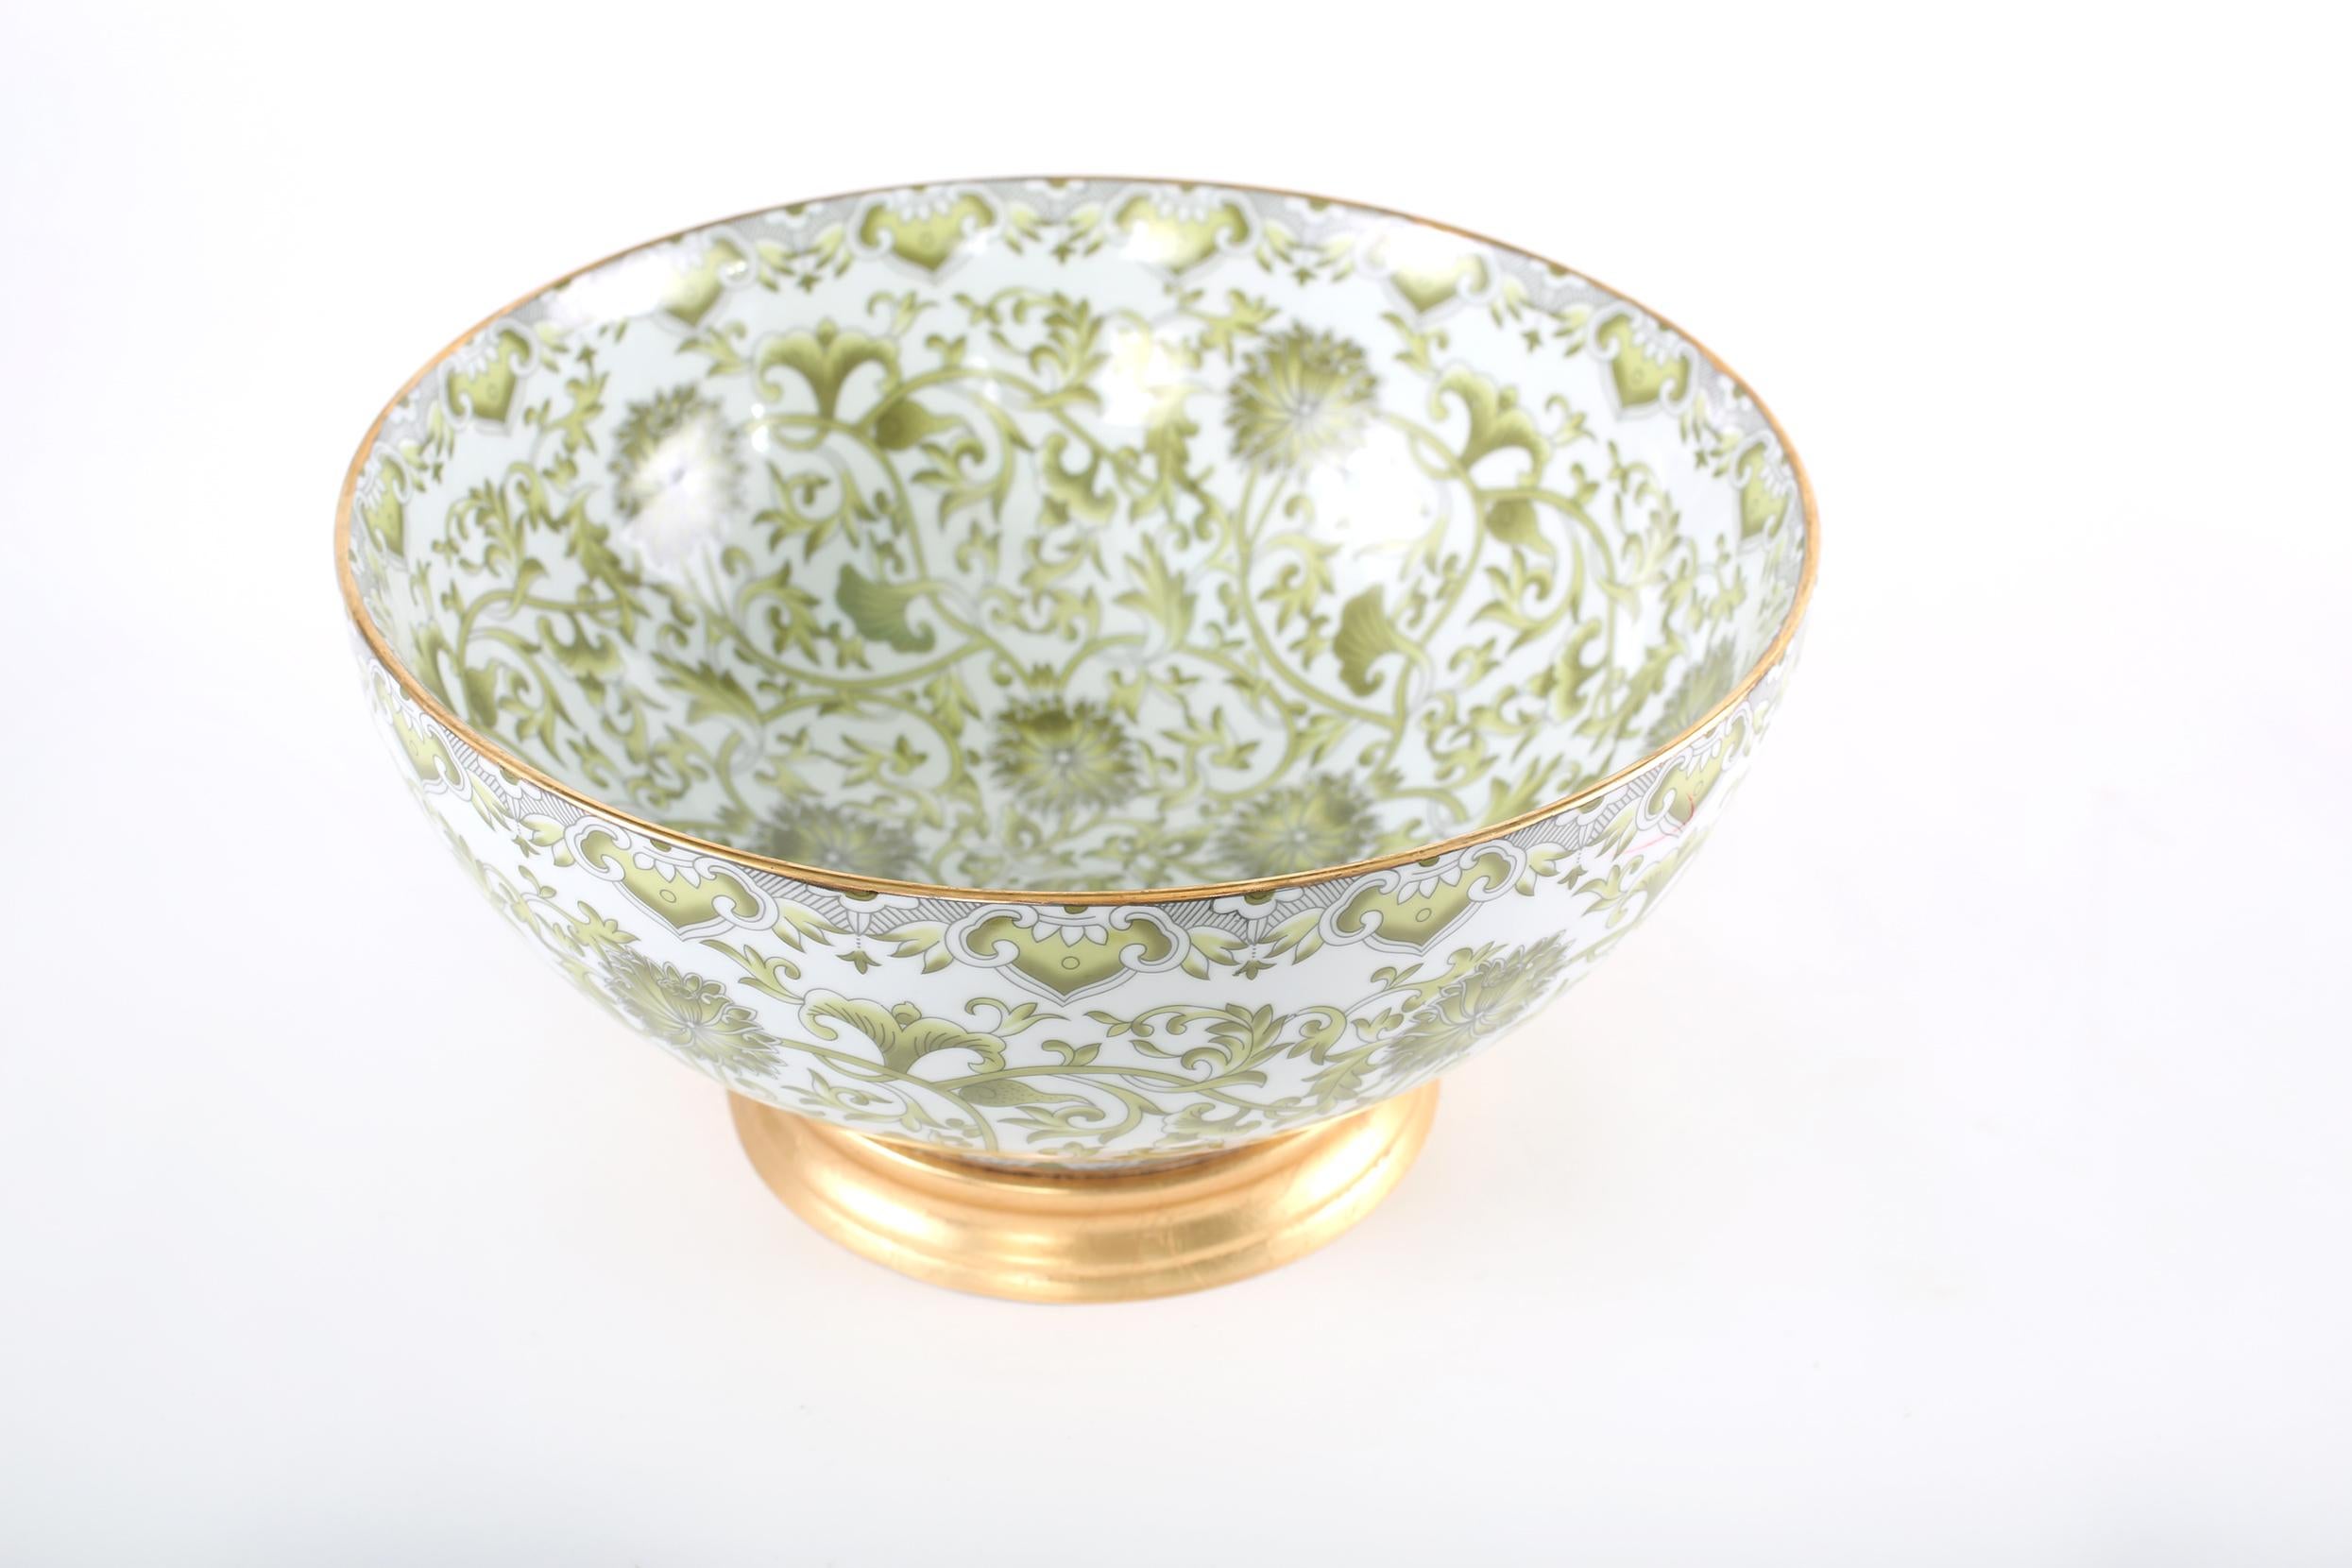 Mid-Century Modern gilt gold base porcelain decorative centerpiece / punch bowl. The centerpiece bowl is in great condition. Minor wear consistent with age / use. The bowl stand about 14 inches x 7.2 inches including the base.